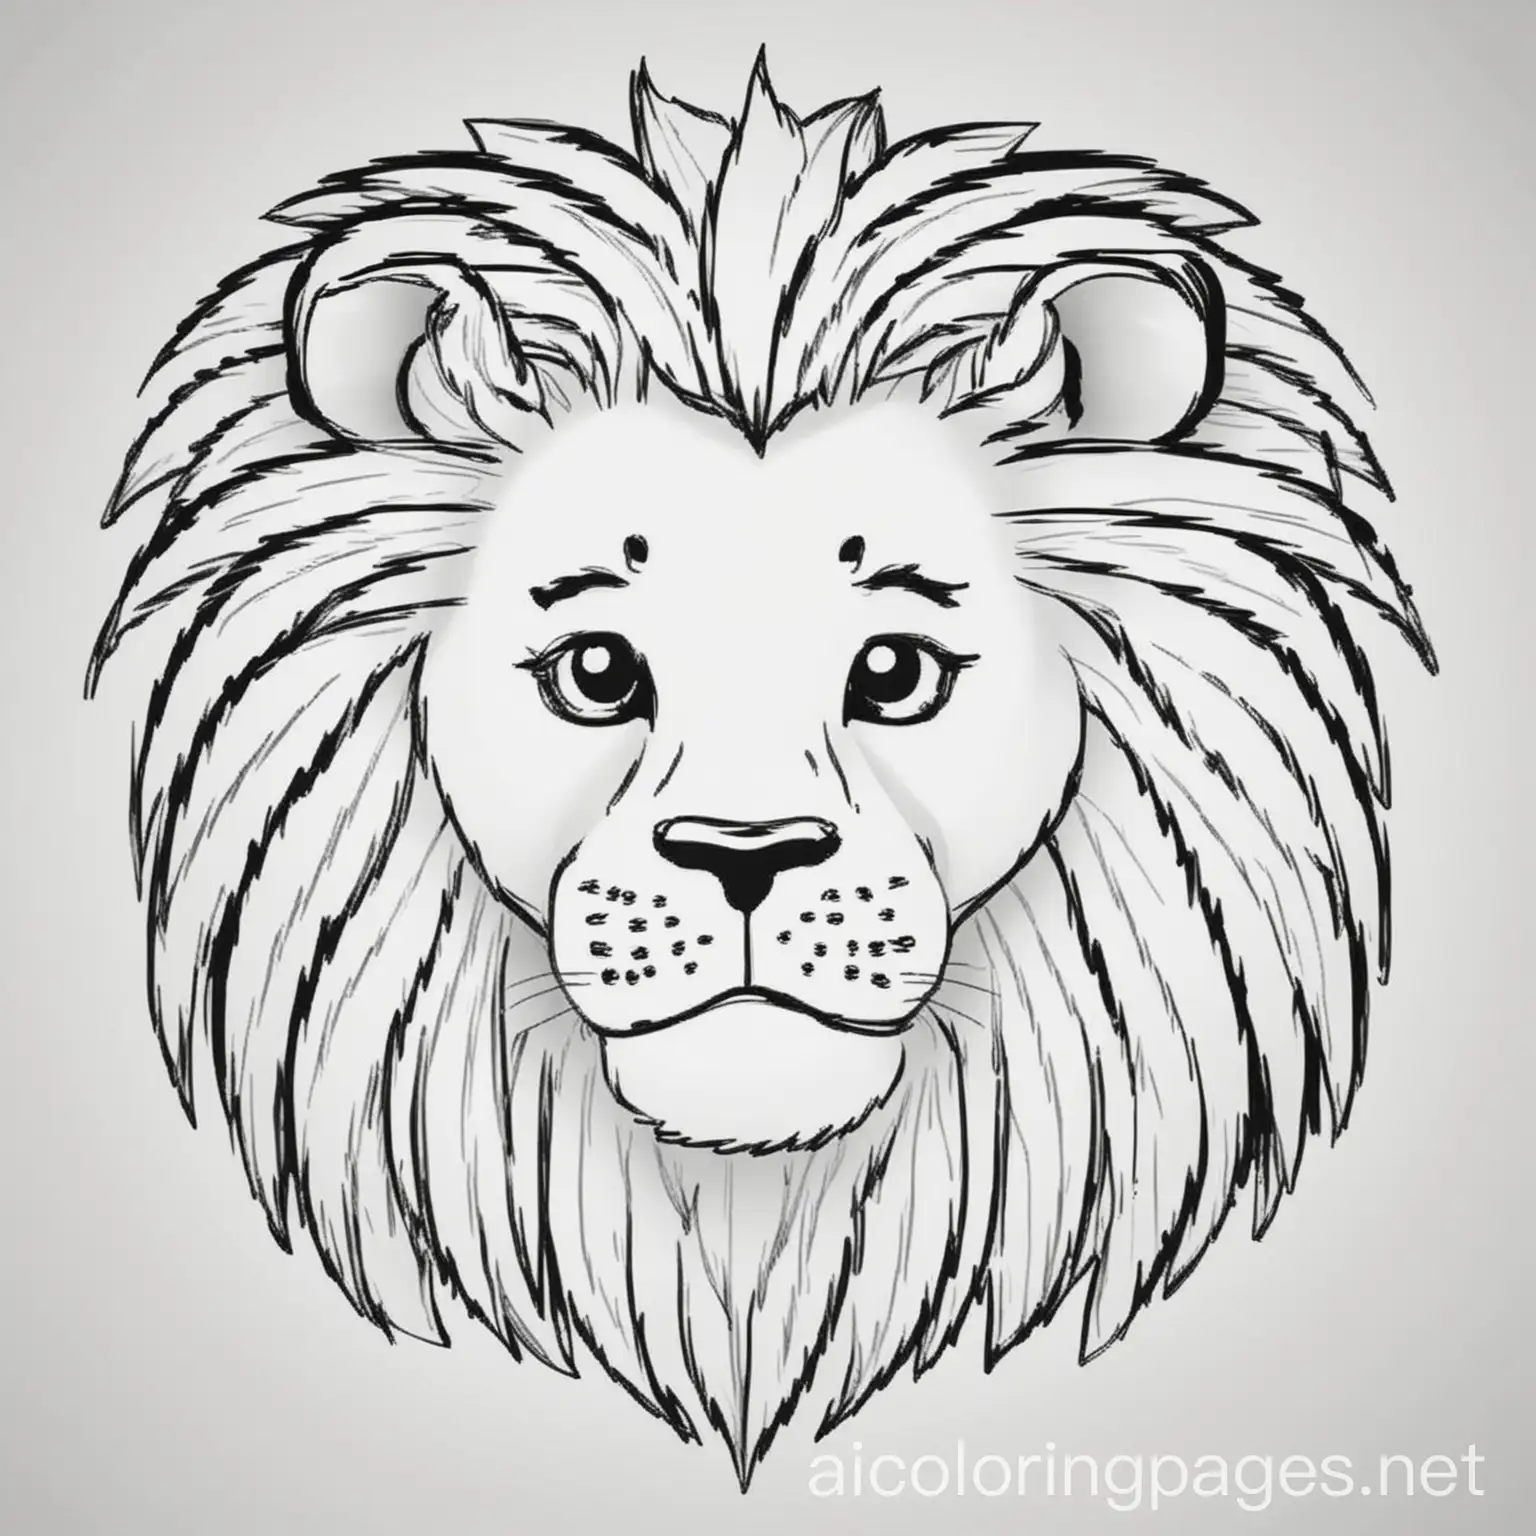 Simple-Lion-Coloring-Page-with-Ample-White-Space